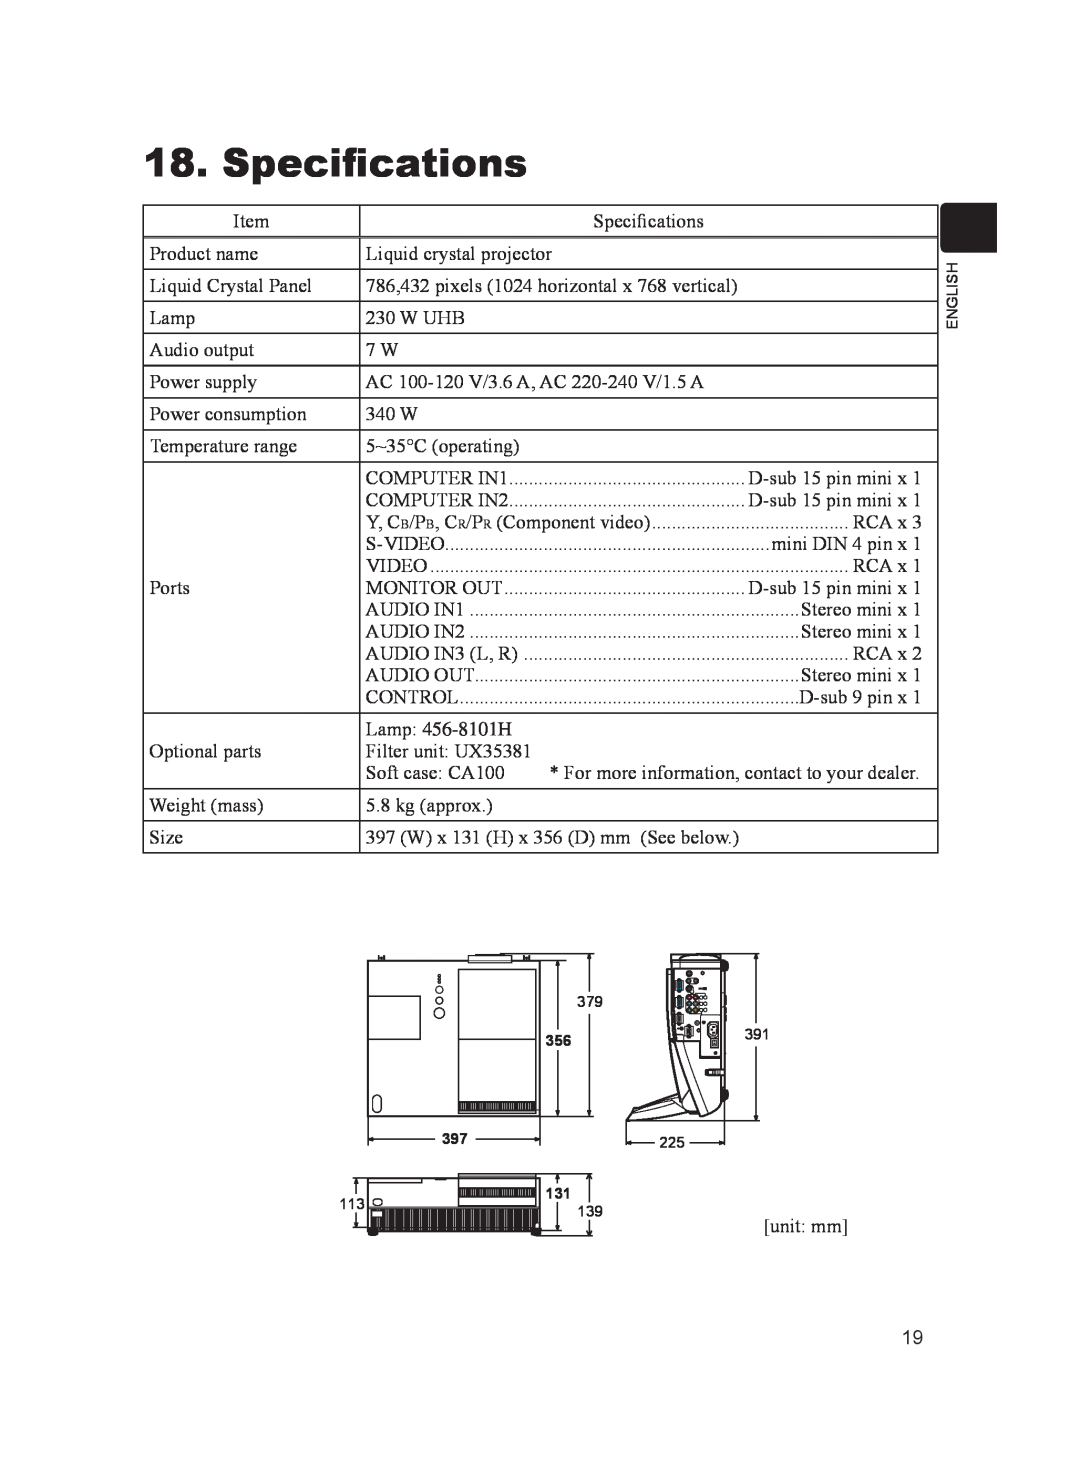 Dukane 8103H user manual Specifications, COMPUTER IN1, COMPUTER IN2, Monitor Out 